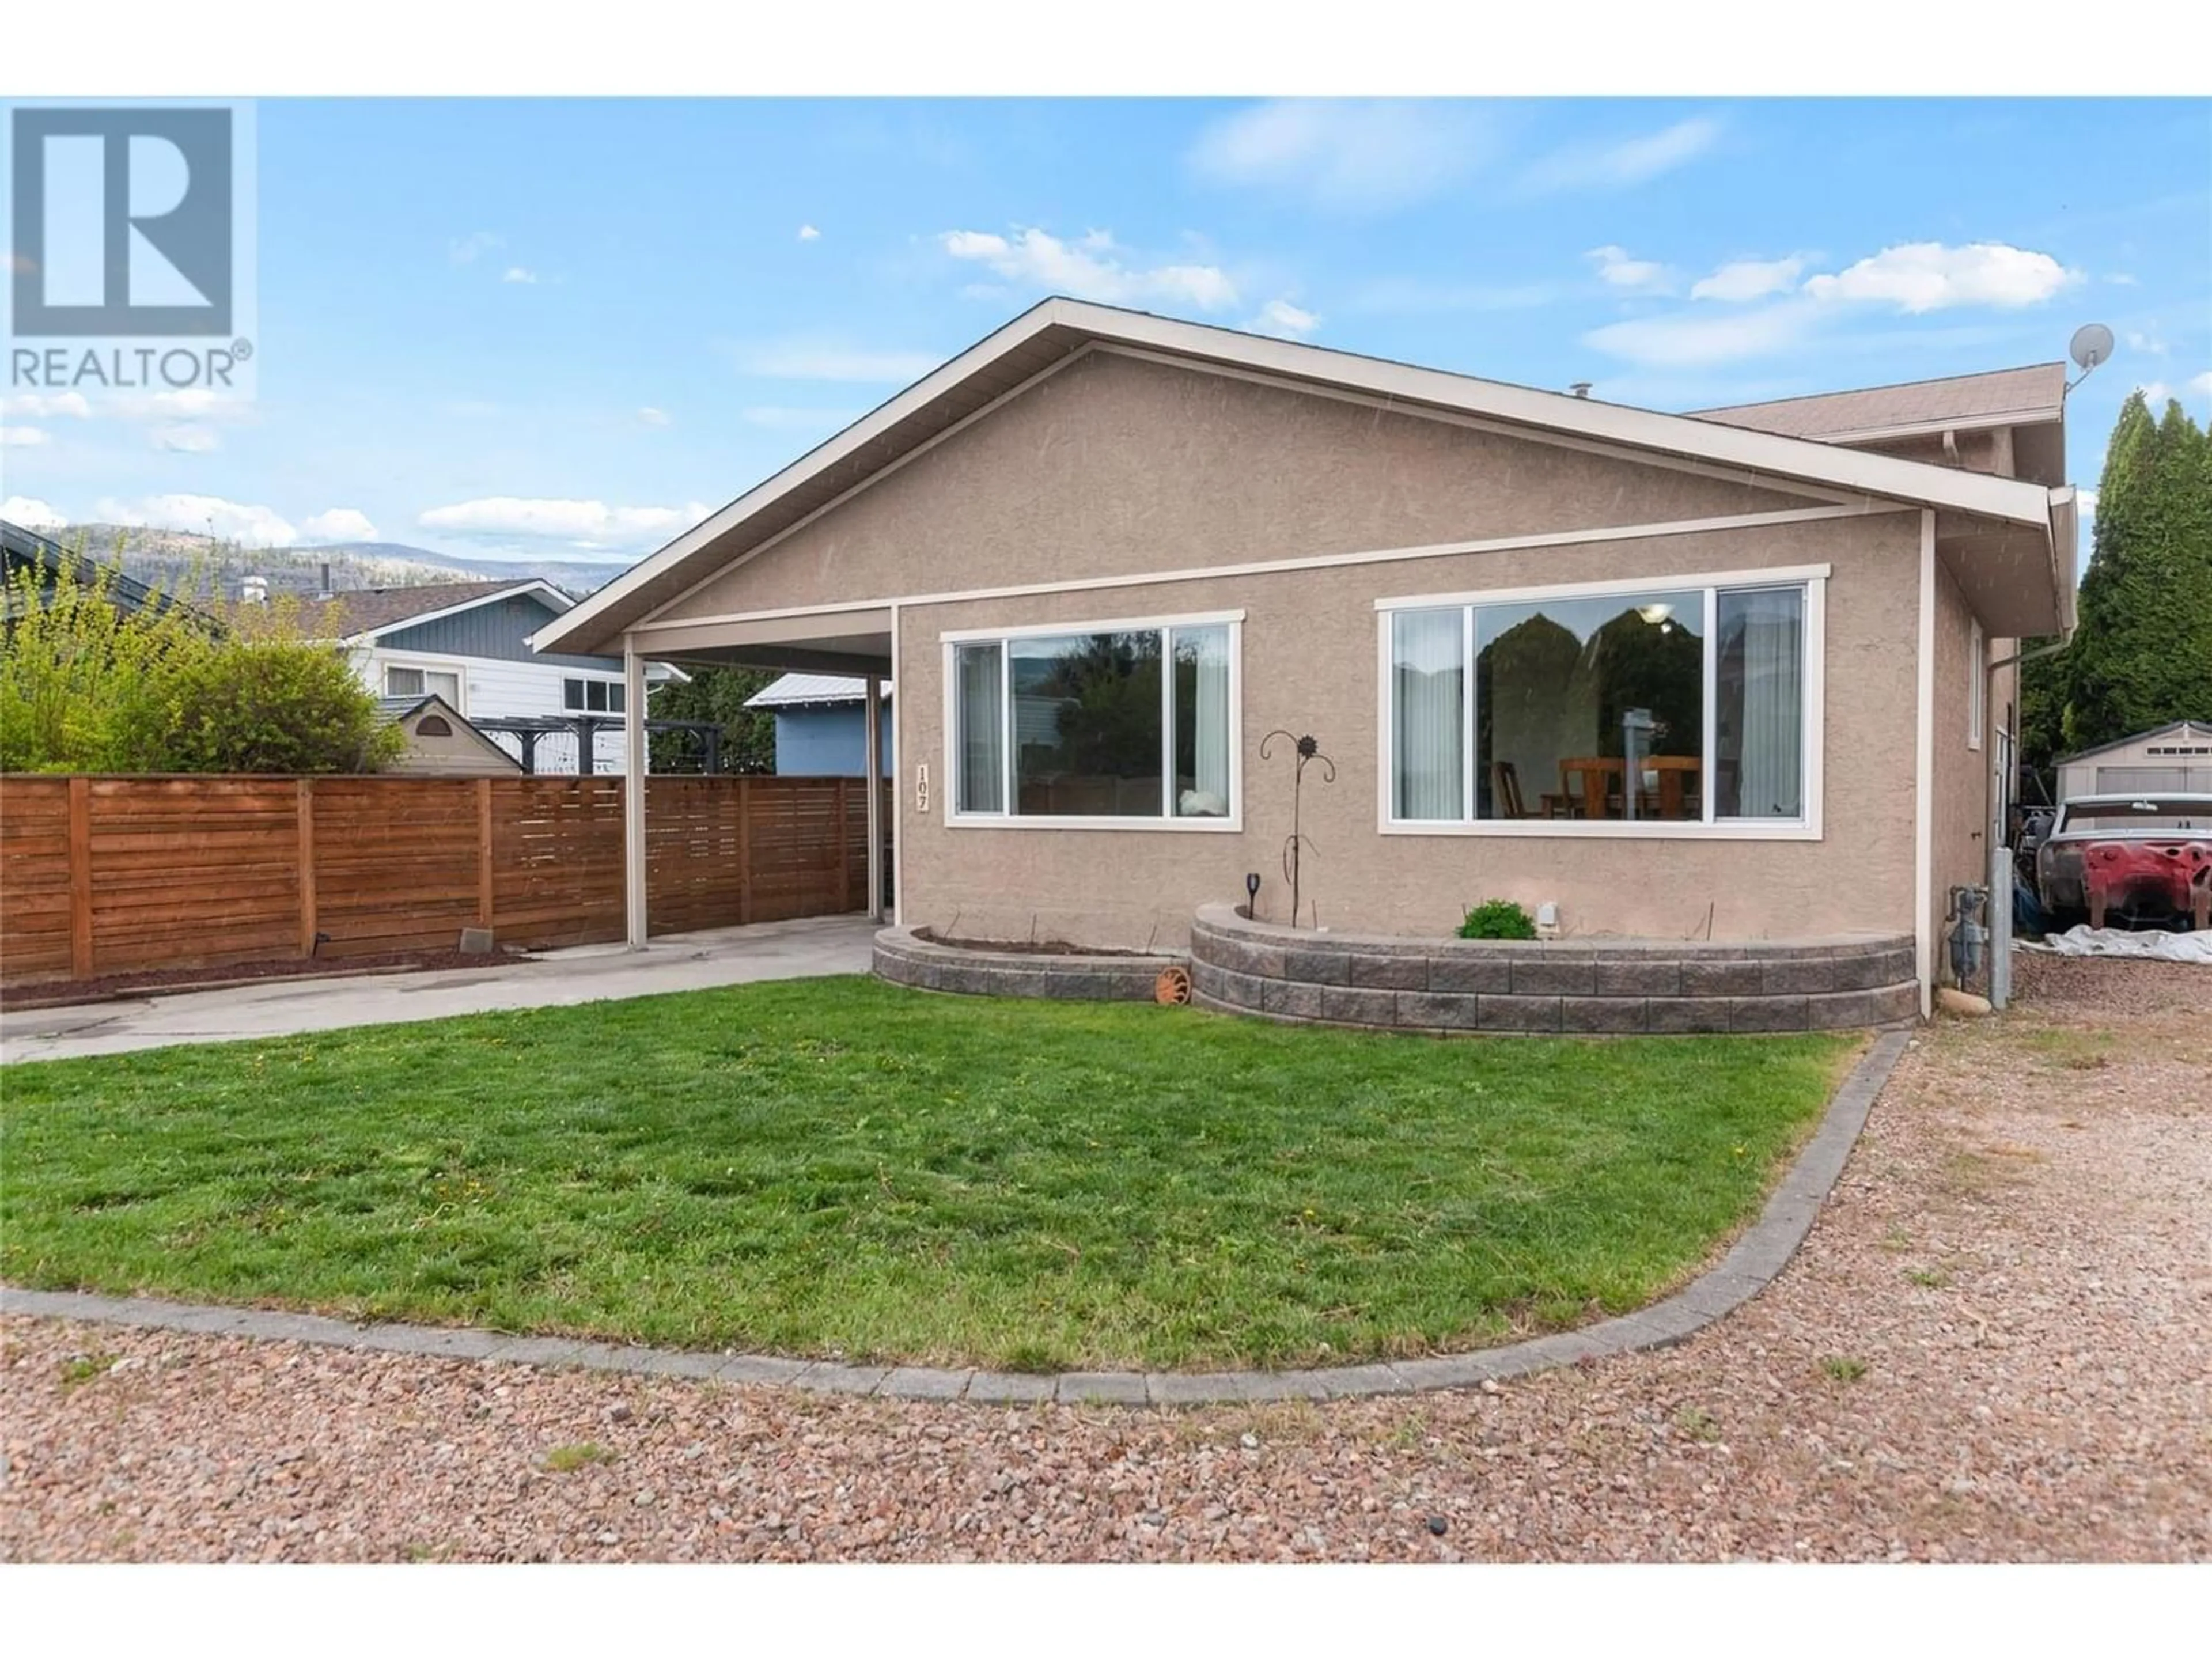 Frontside or backside of a home for 107 Blairmore Crescent, Penticton British Columbia V2A7C5